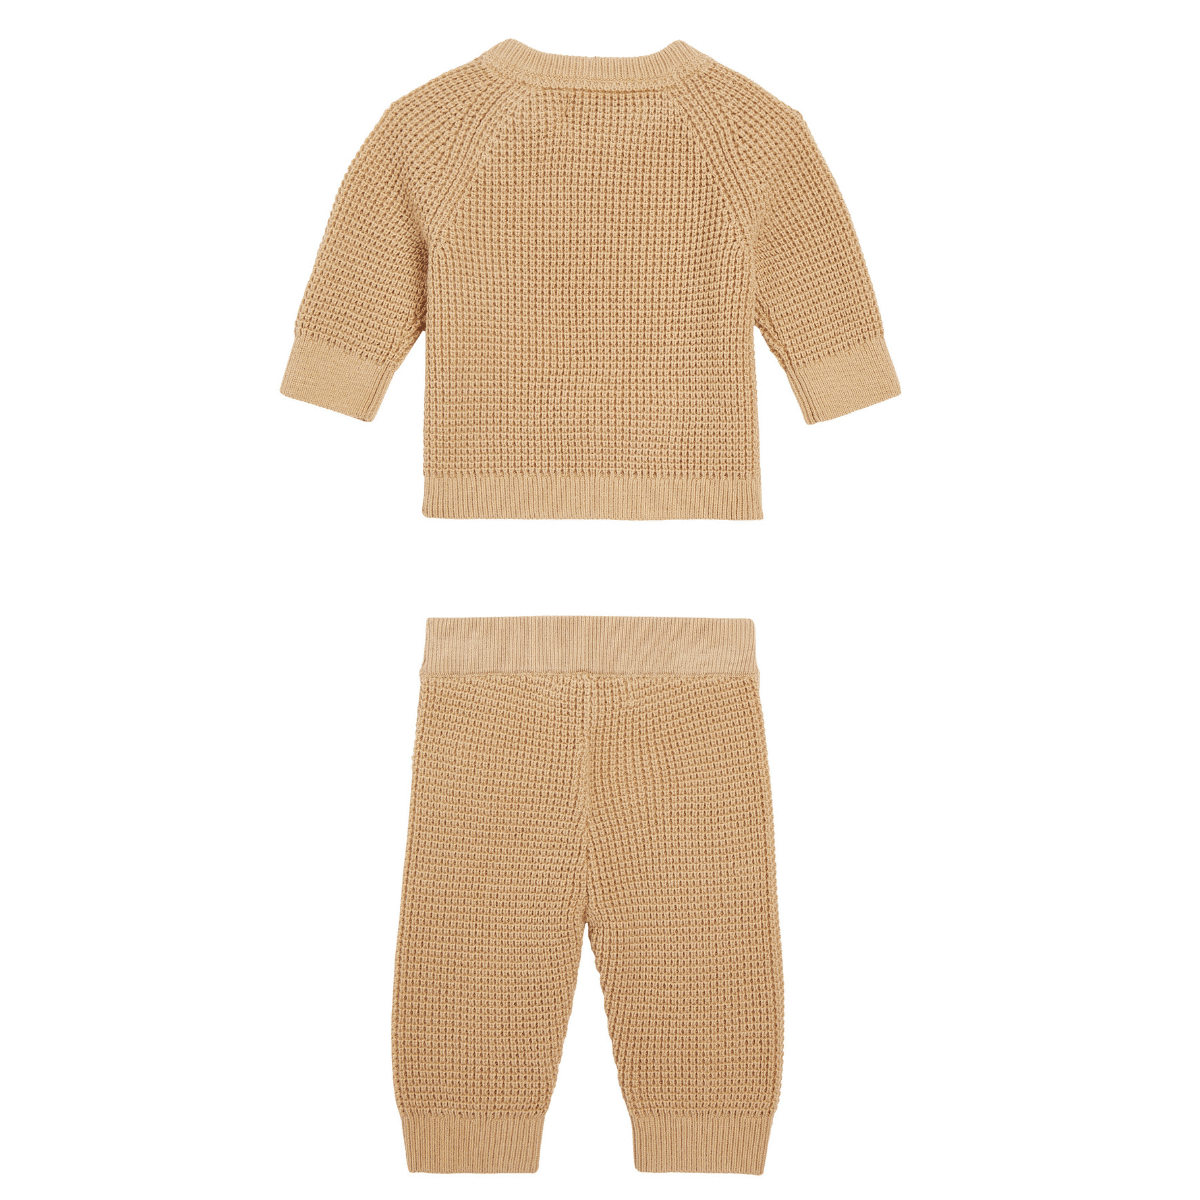 CK baby camel waffle tuck knitted set back view